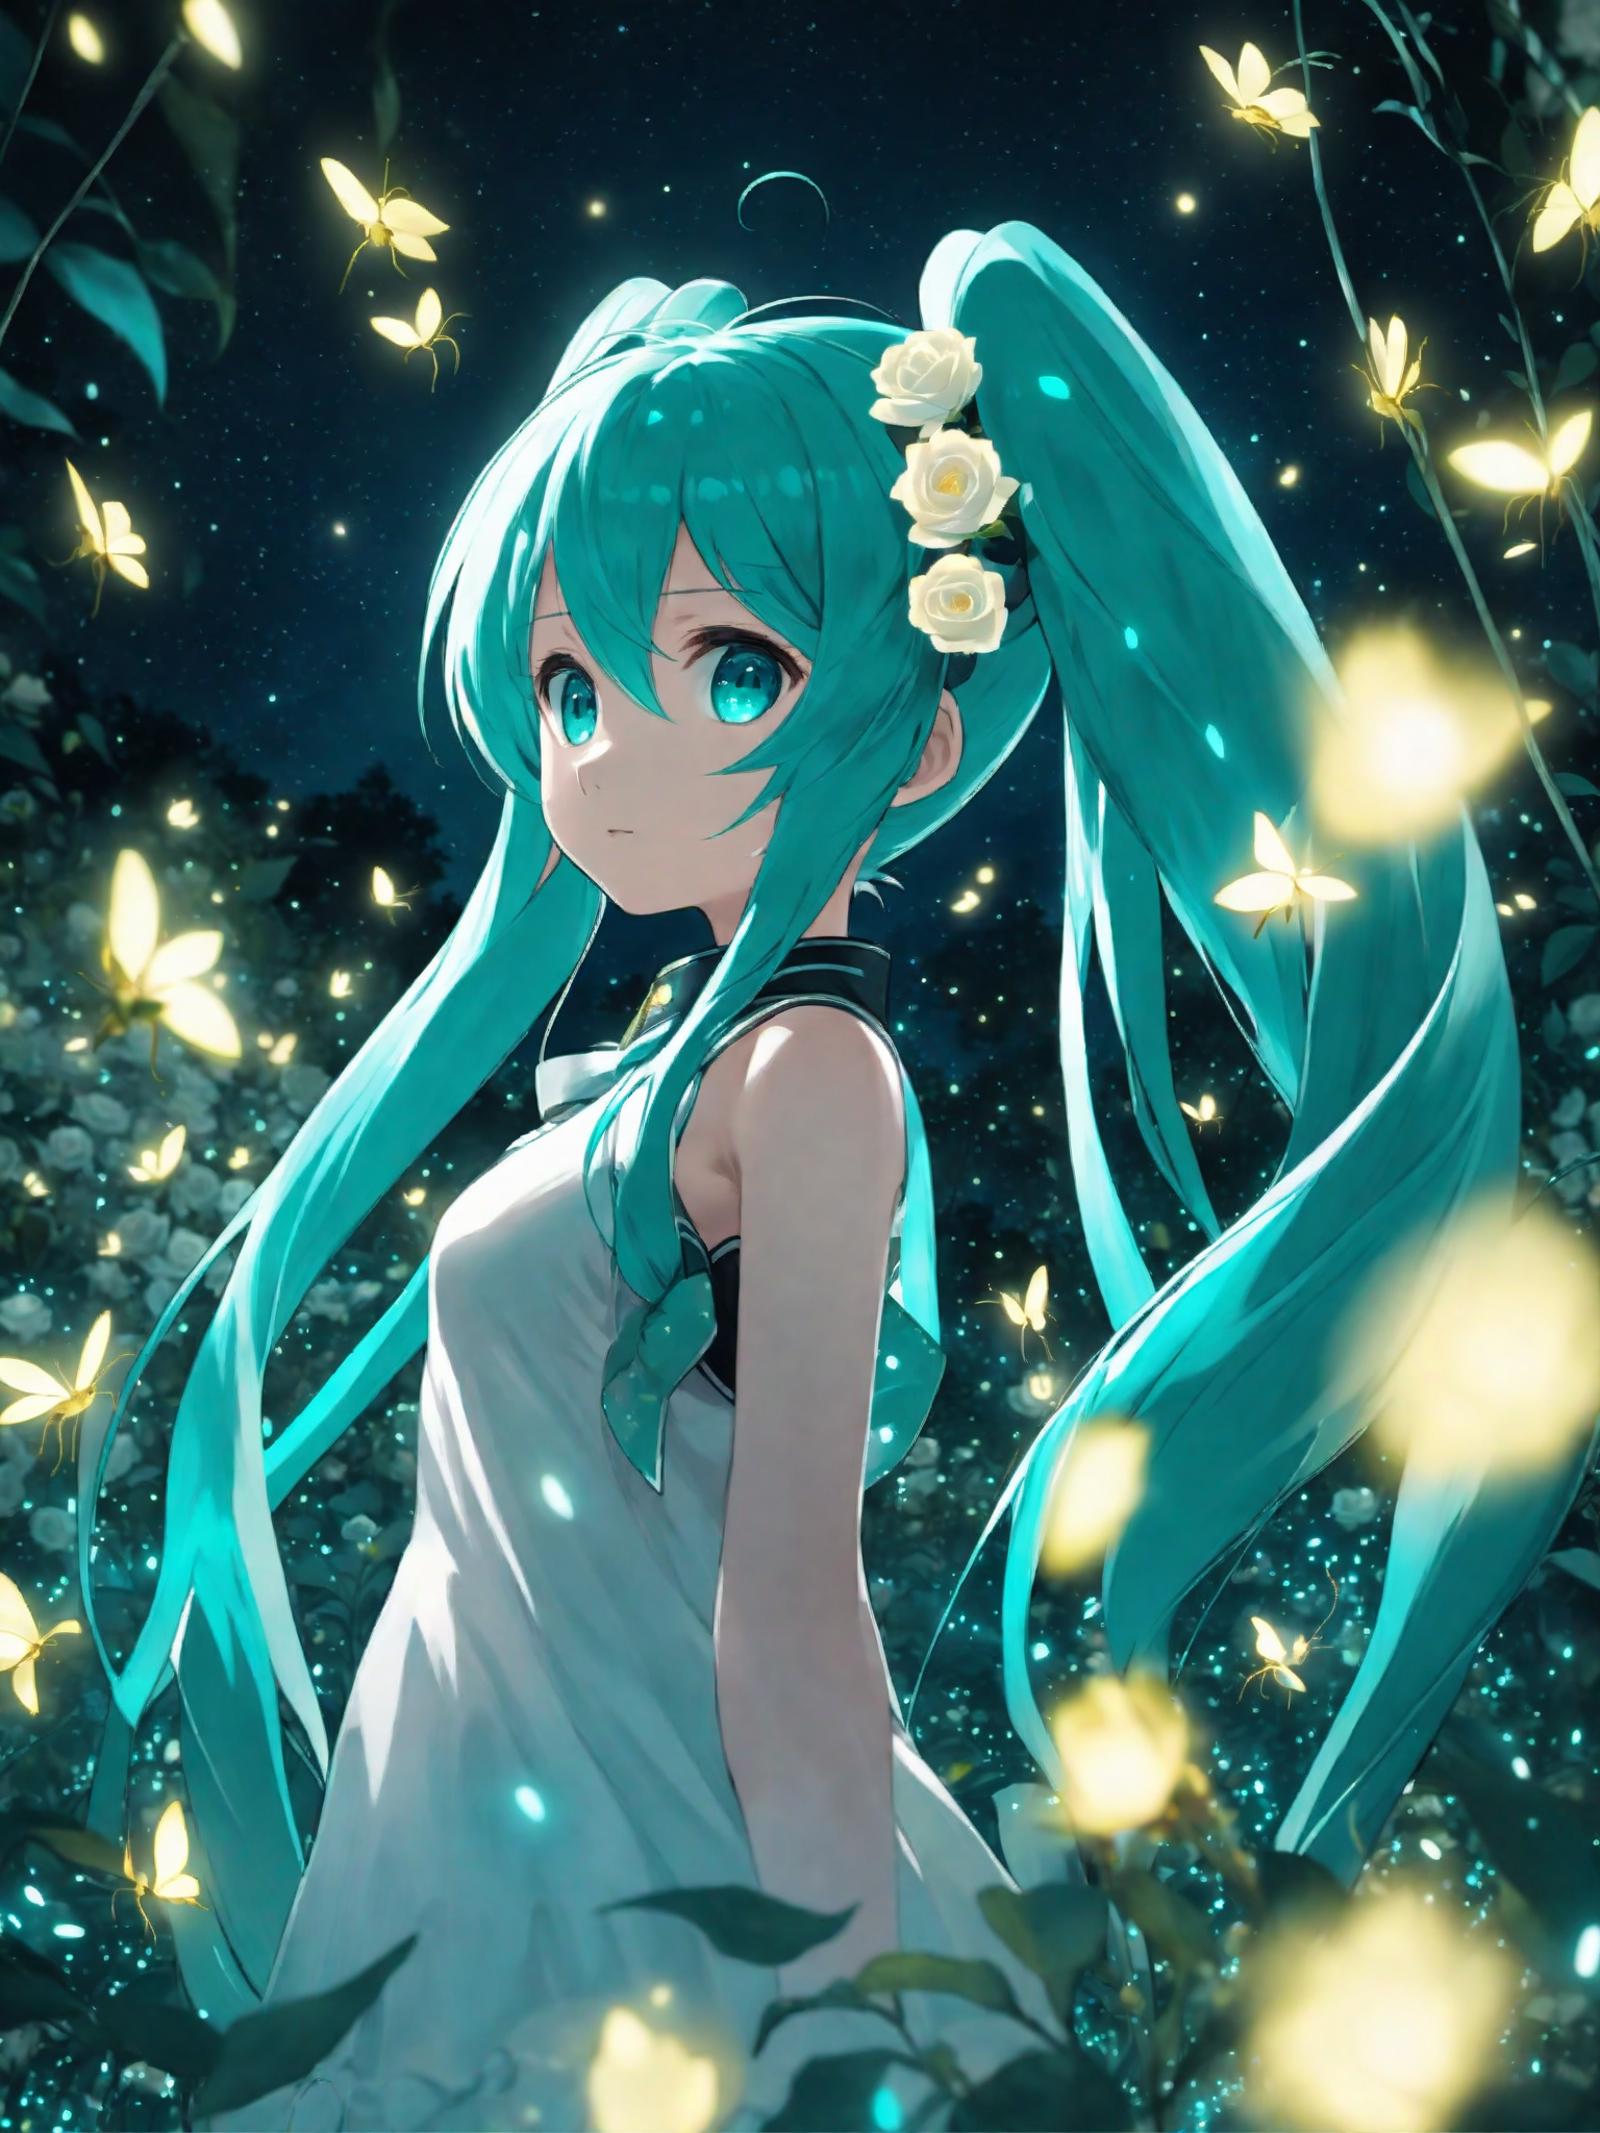 Anime Character with Blue Hair and White Flower in Her Hair.